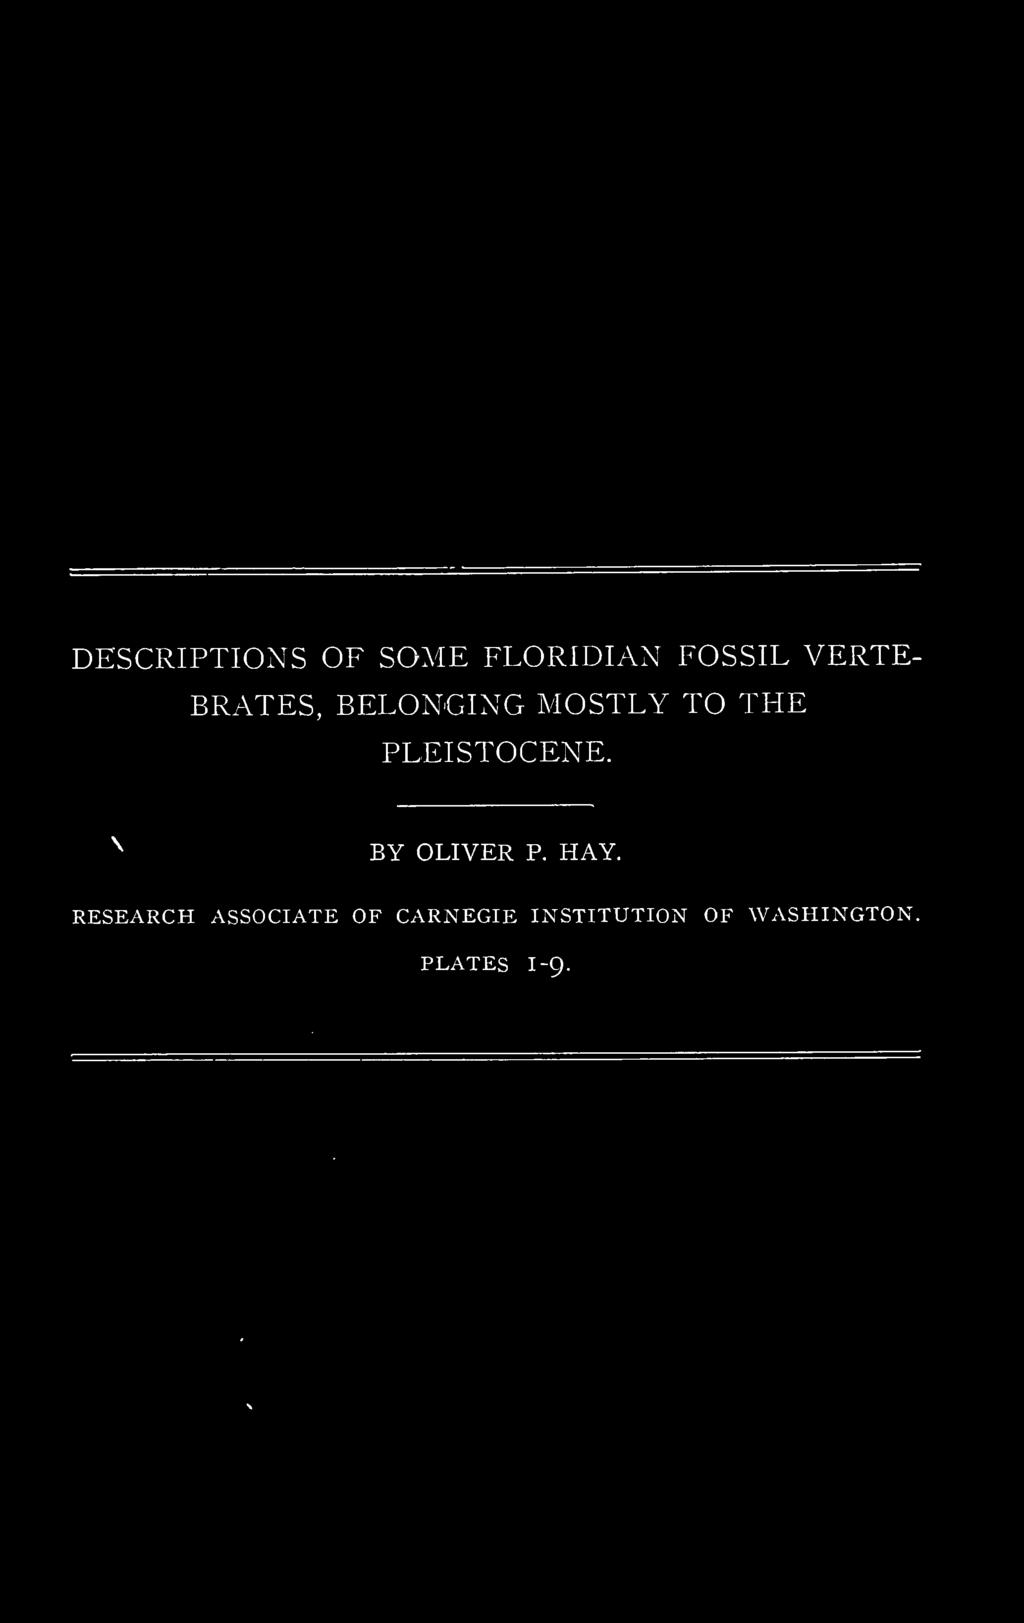 DESCRIPTIONS OF SOME FLORIDIAN FOSSIL VERTE- BRATES, BELONGING MOSTLY TO THE PLEISTOCENE.